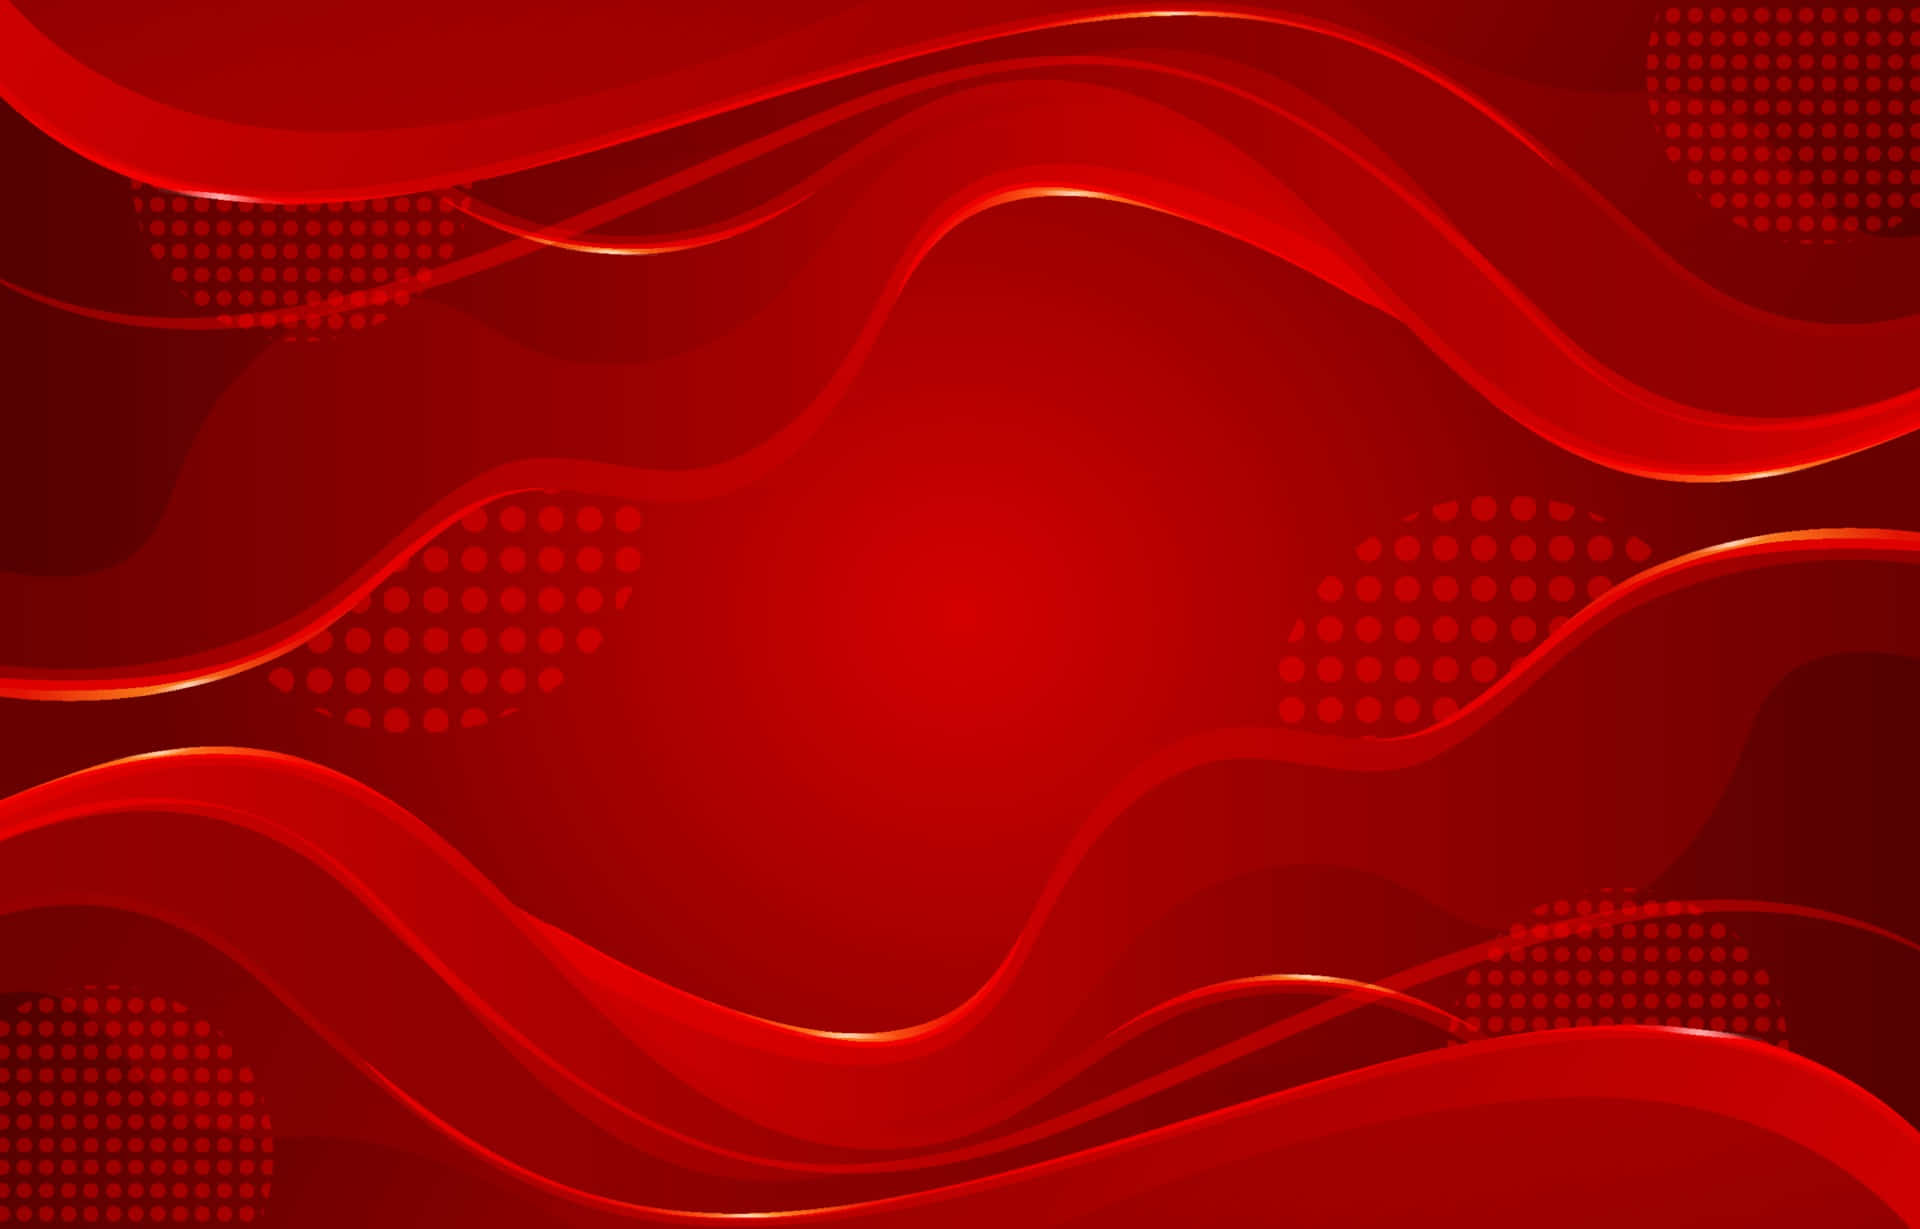 Solid Red Wavy Abstract Wallpaper